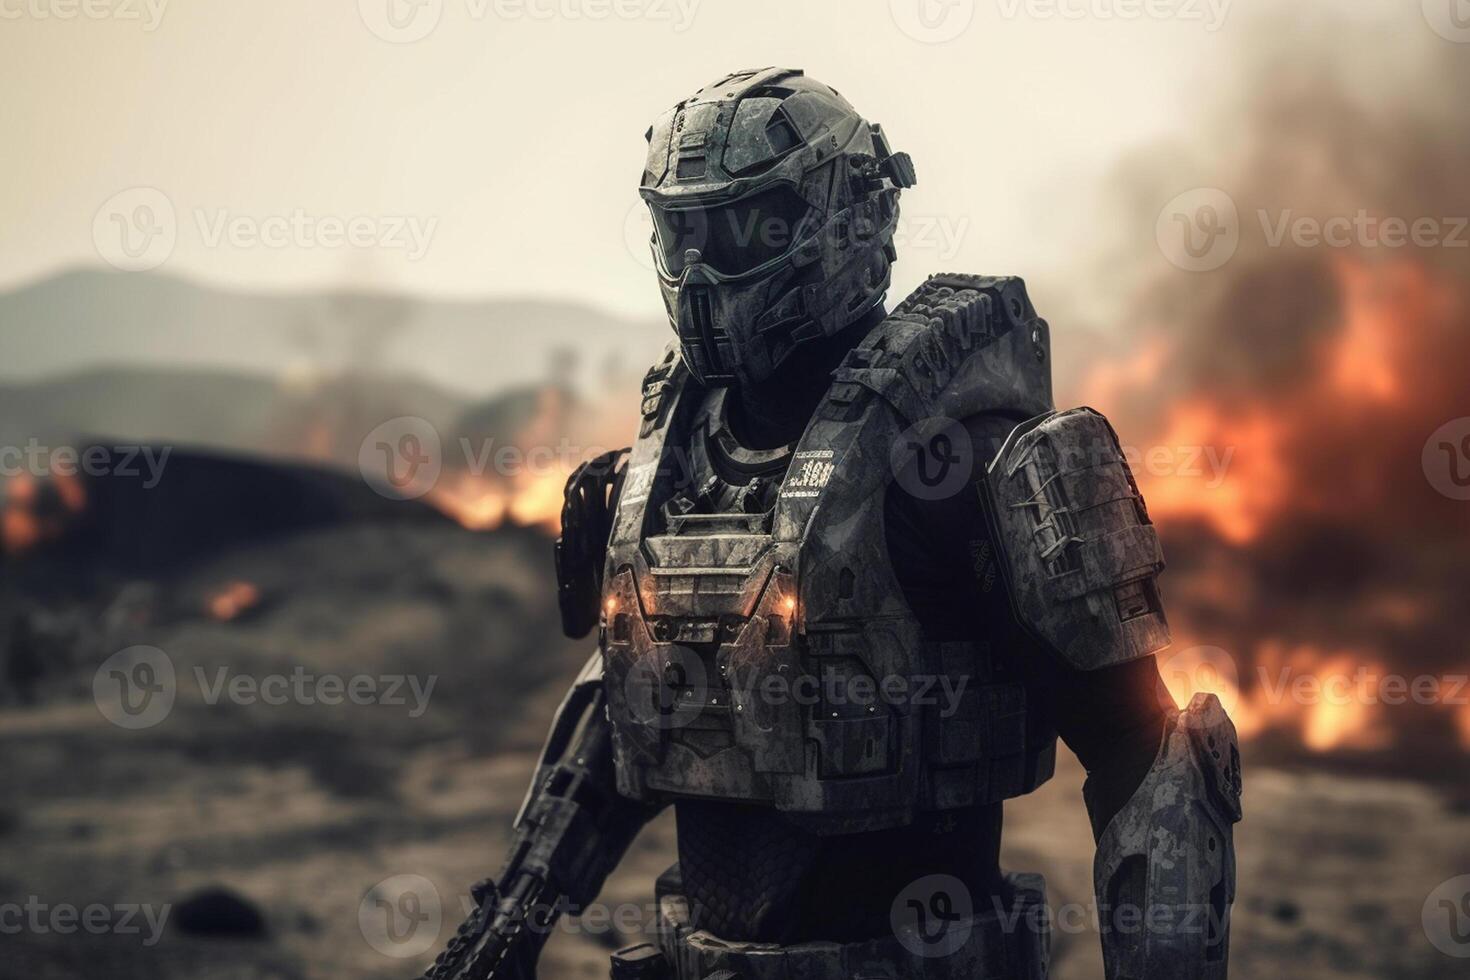 A soldier in a futuristic suit stands in front of a burning fire photo